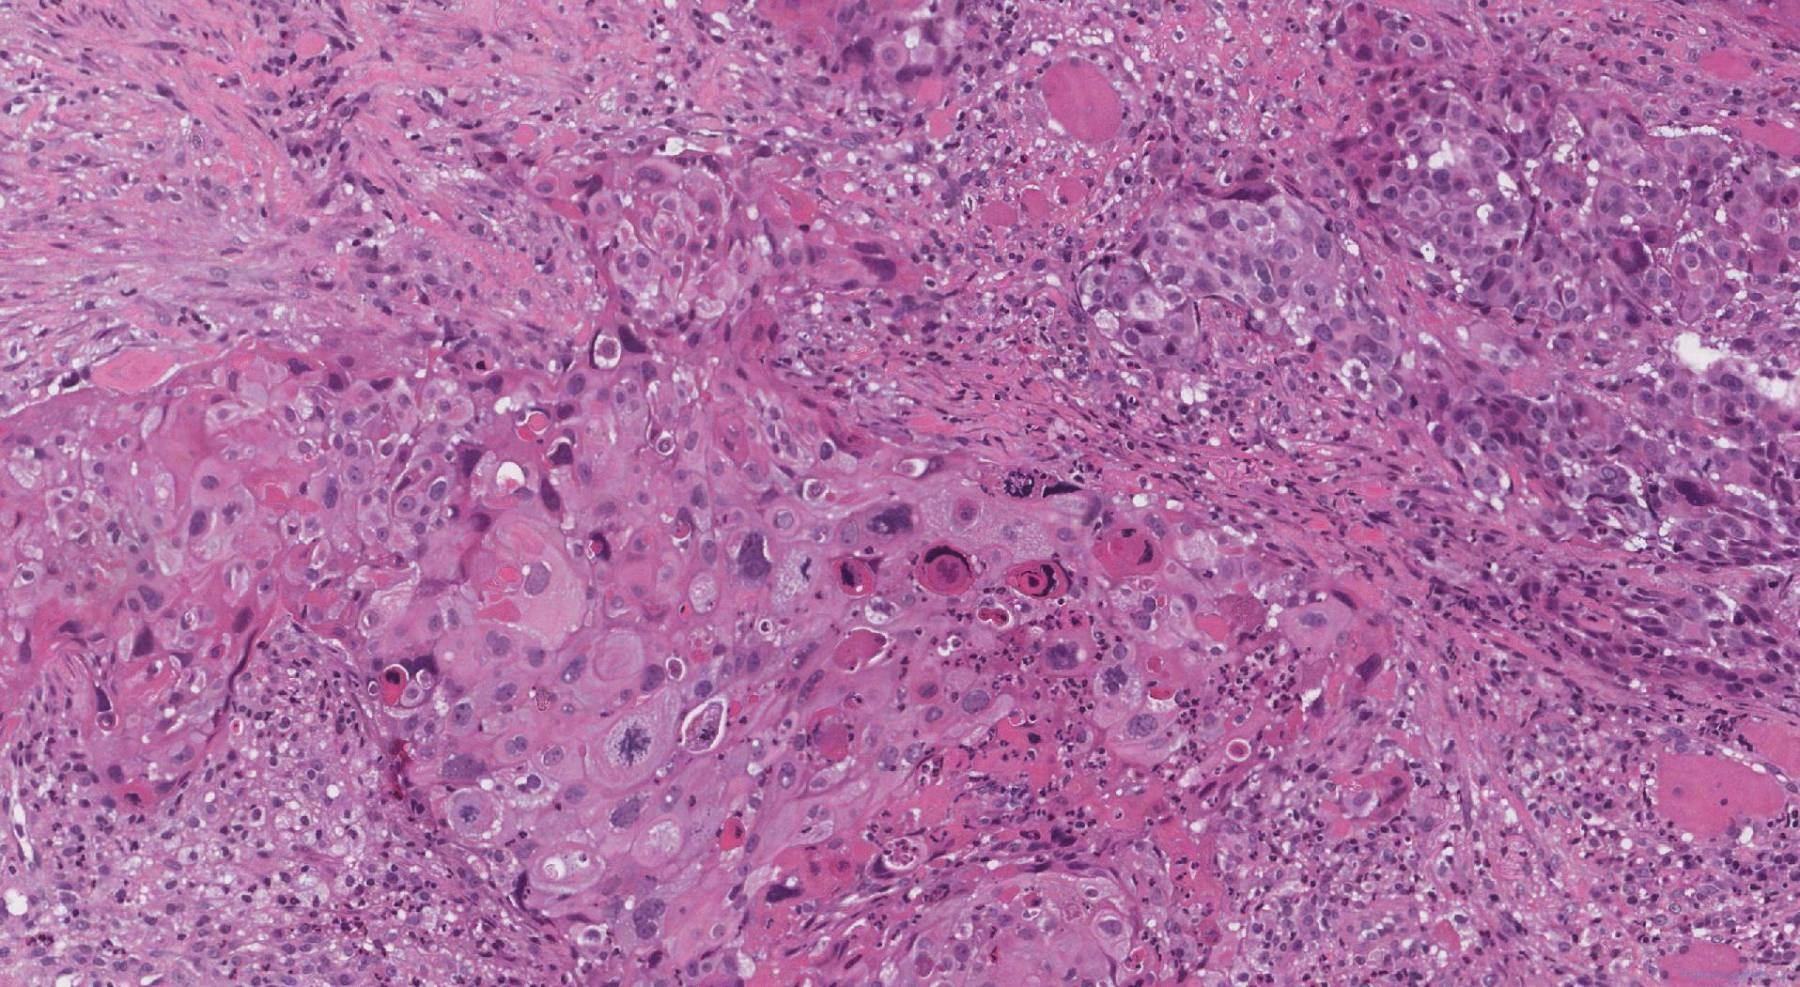 Hpv Associated Squamous Cell Carcinoma Of The Oropharynx Atlas Of Pathology